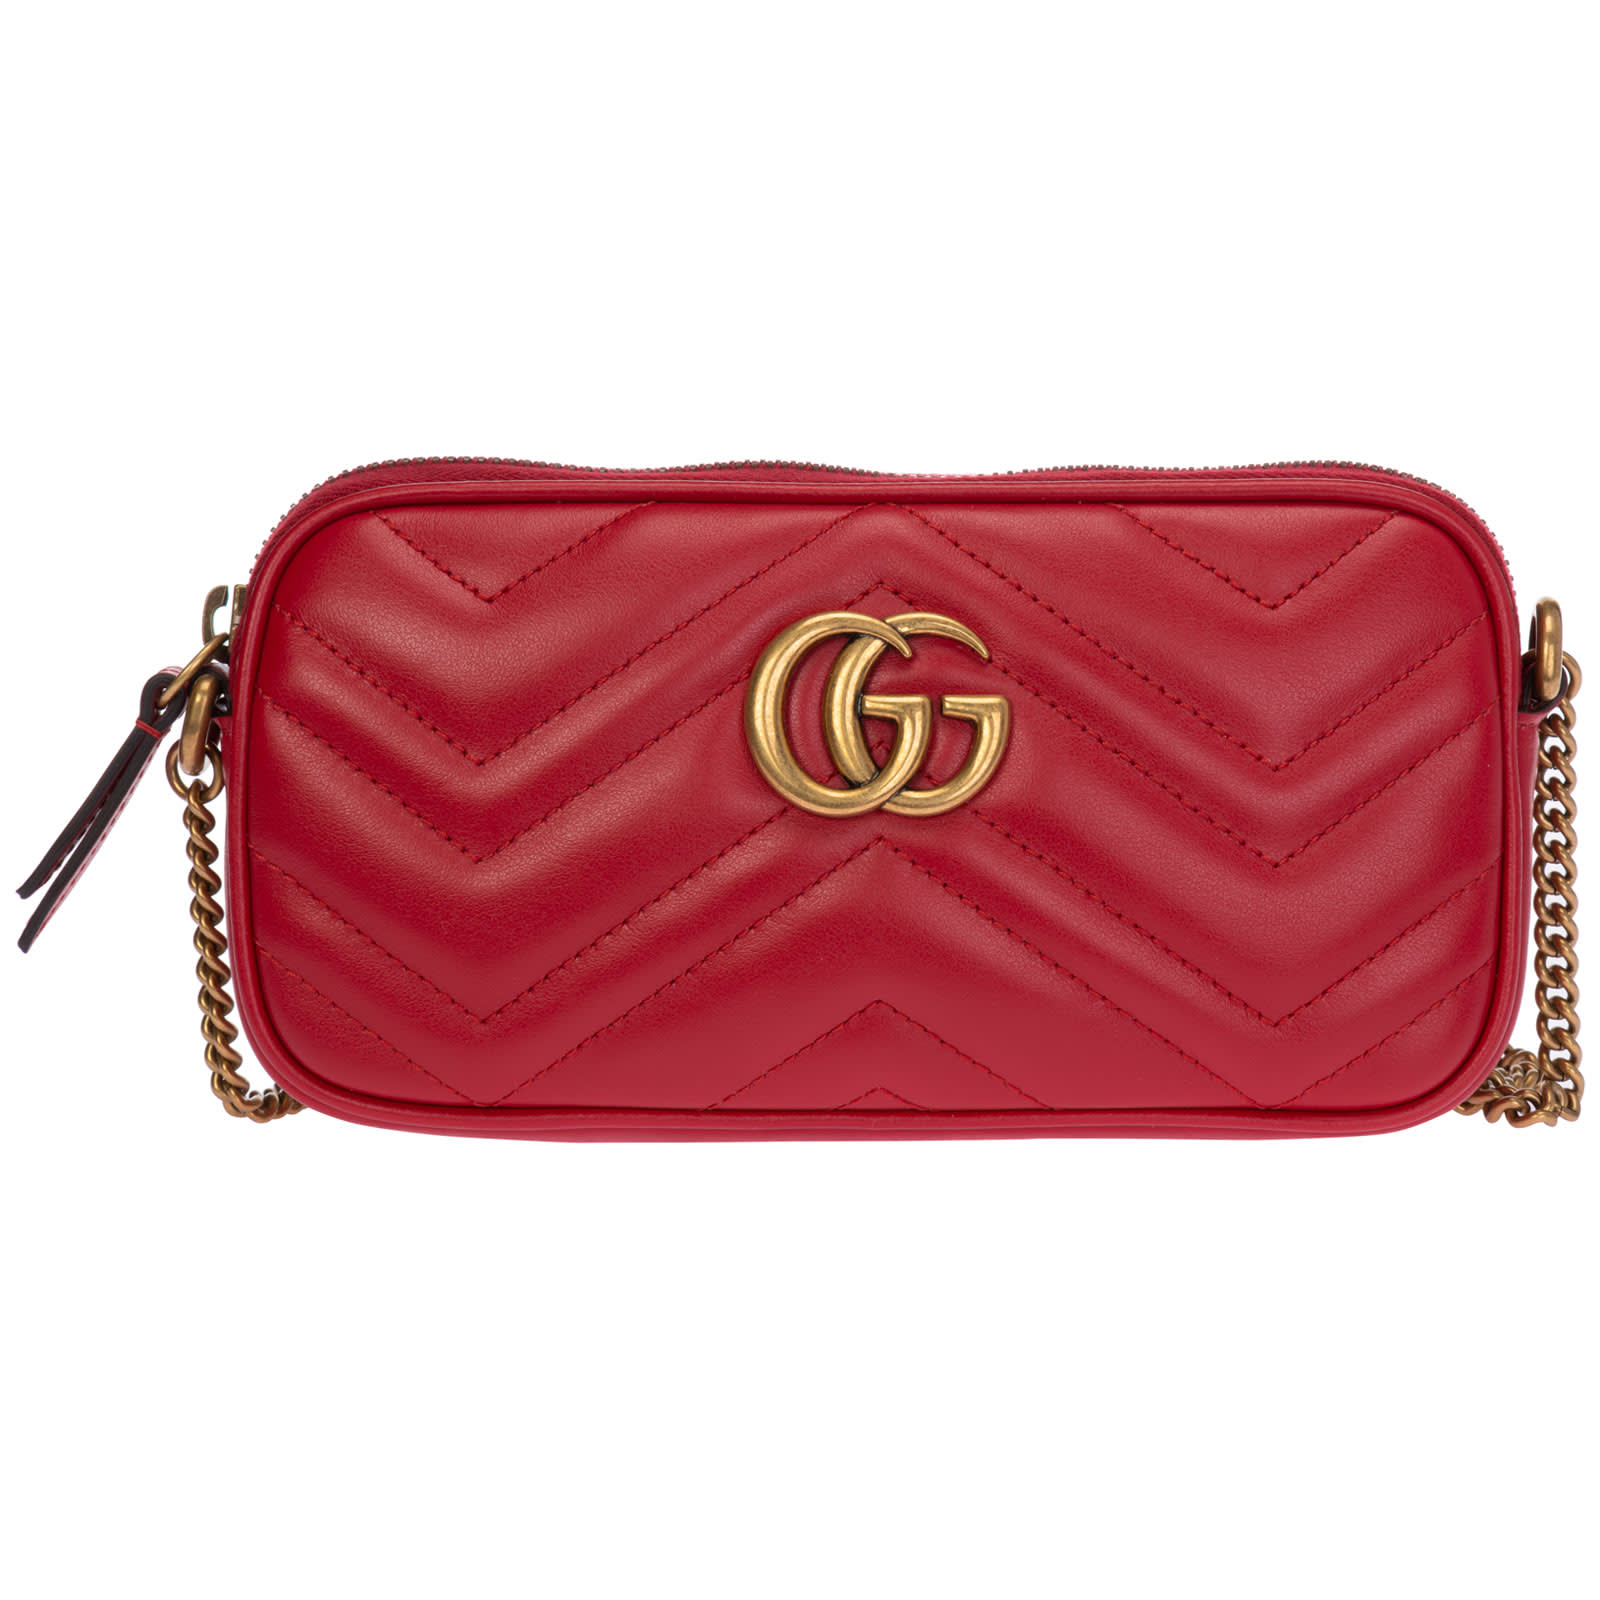 GUCCI GG MARMONT CROSSBODY BAGS,11312236